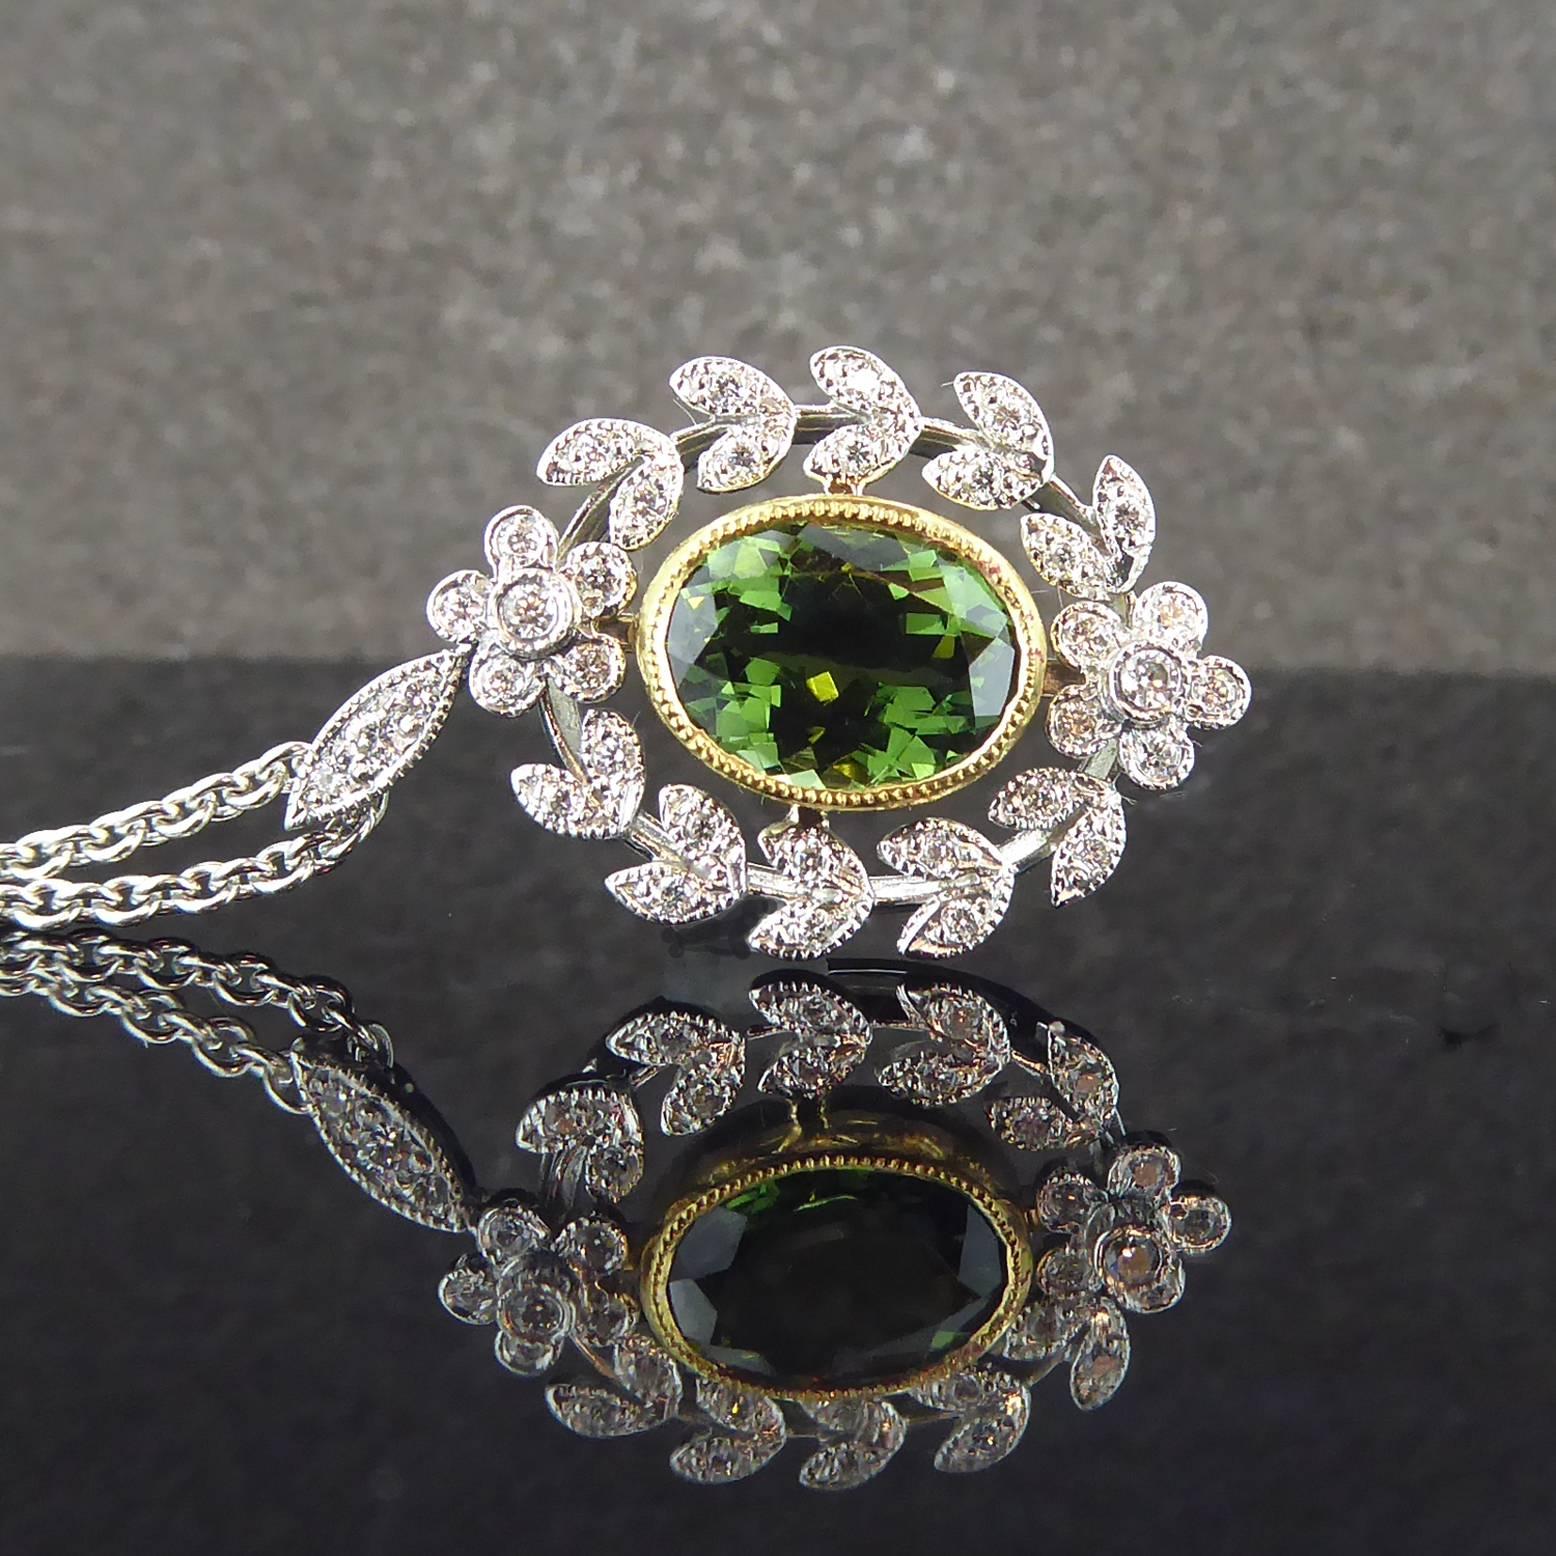 A refined an elegant antique style pendant created in the Belle Epoque style which lasted from the 1870s through to the outbreak of the 1st World War.  Set to the centre with an oval, mixed cut green tourmaline of deep and rich hue in a contrasting